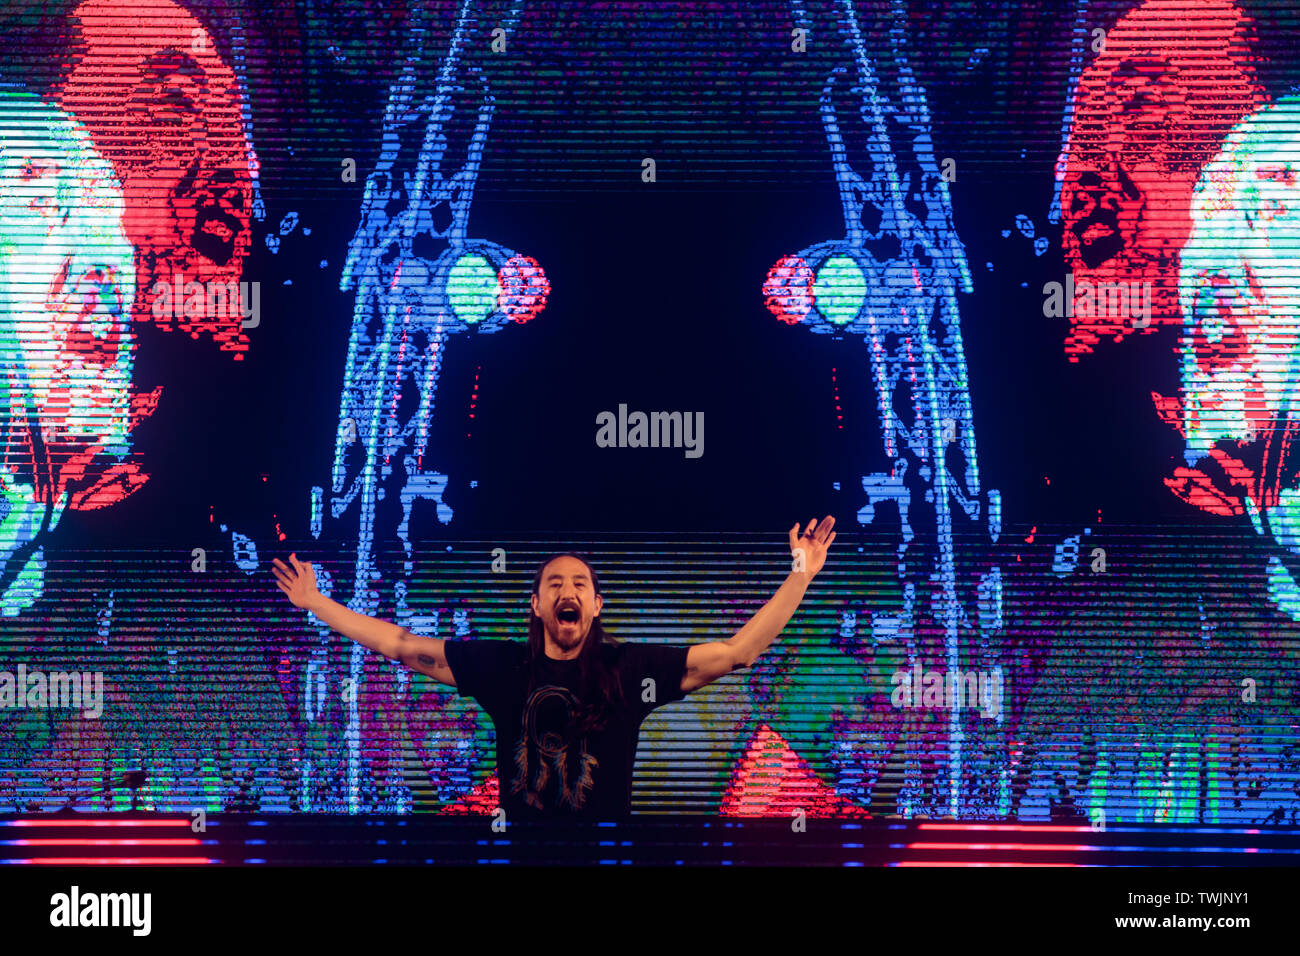 steve aoki performs a djset during the gruvillage festival Stock Photo